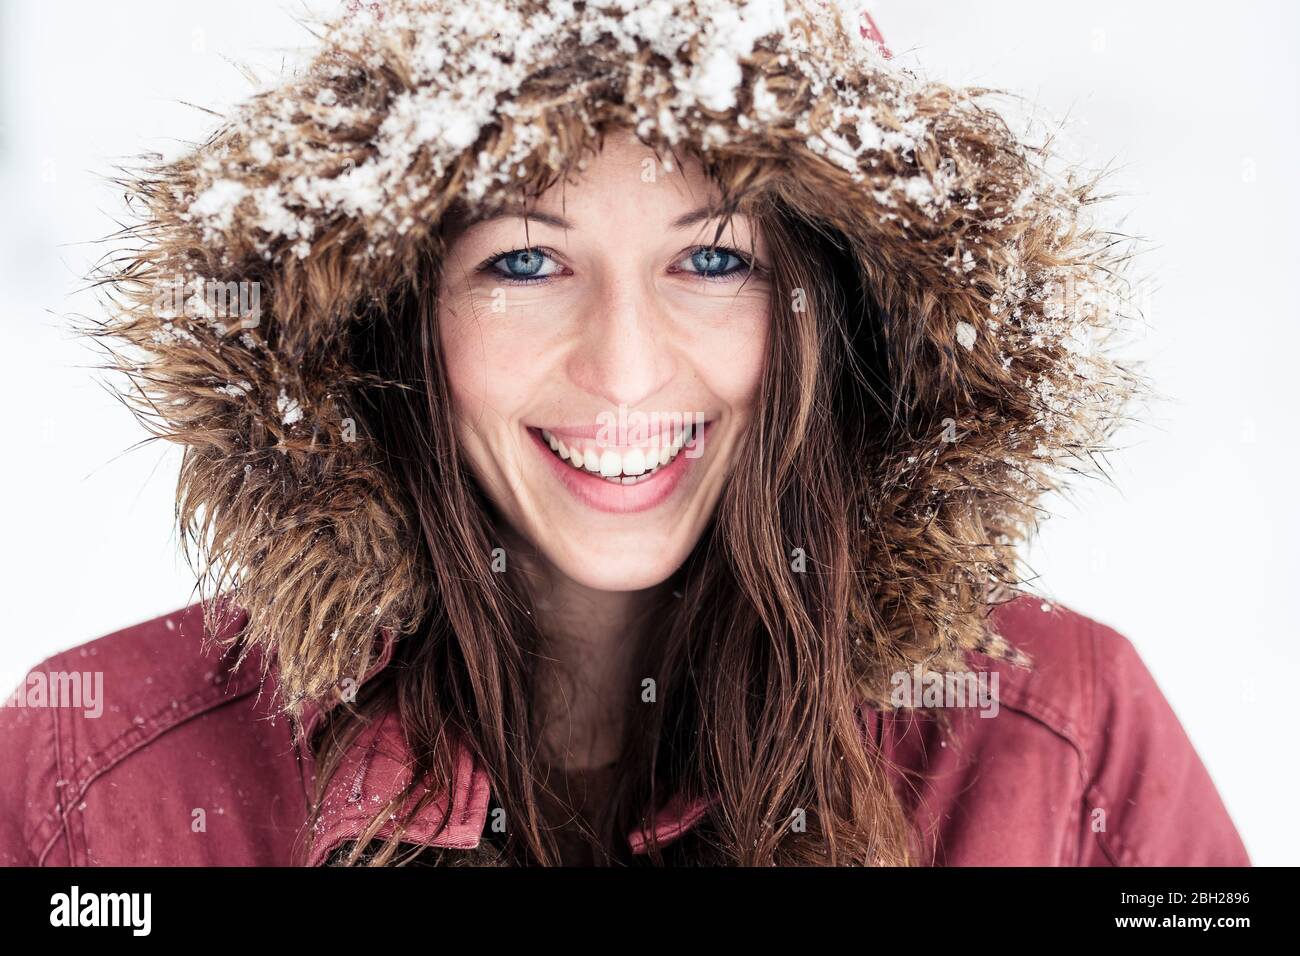 Portrait of laughing young woman with blue eyes in winter Stock Photo